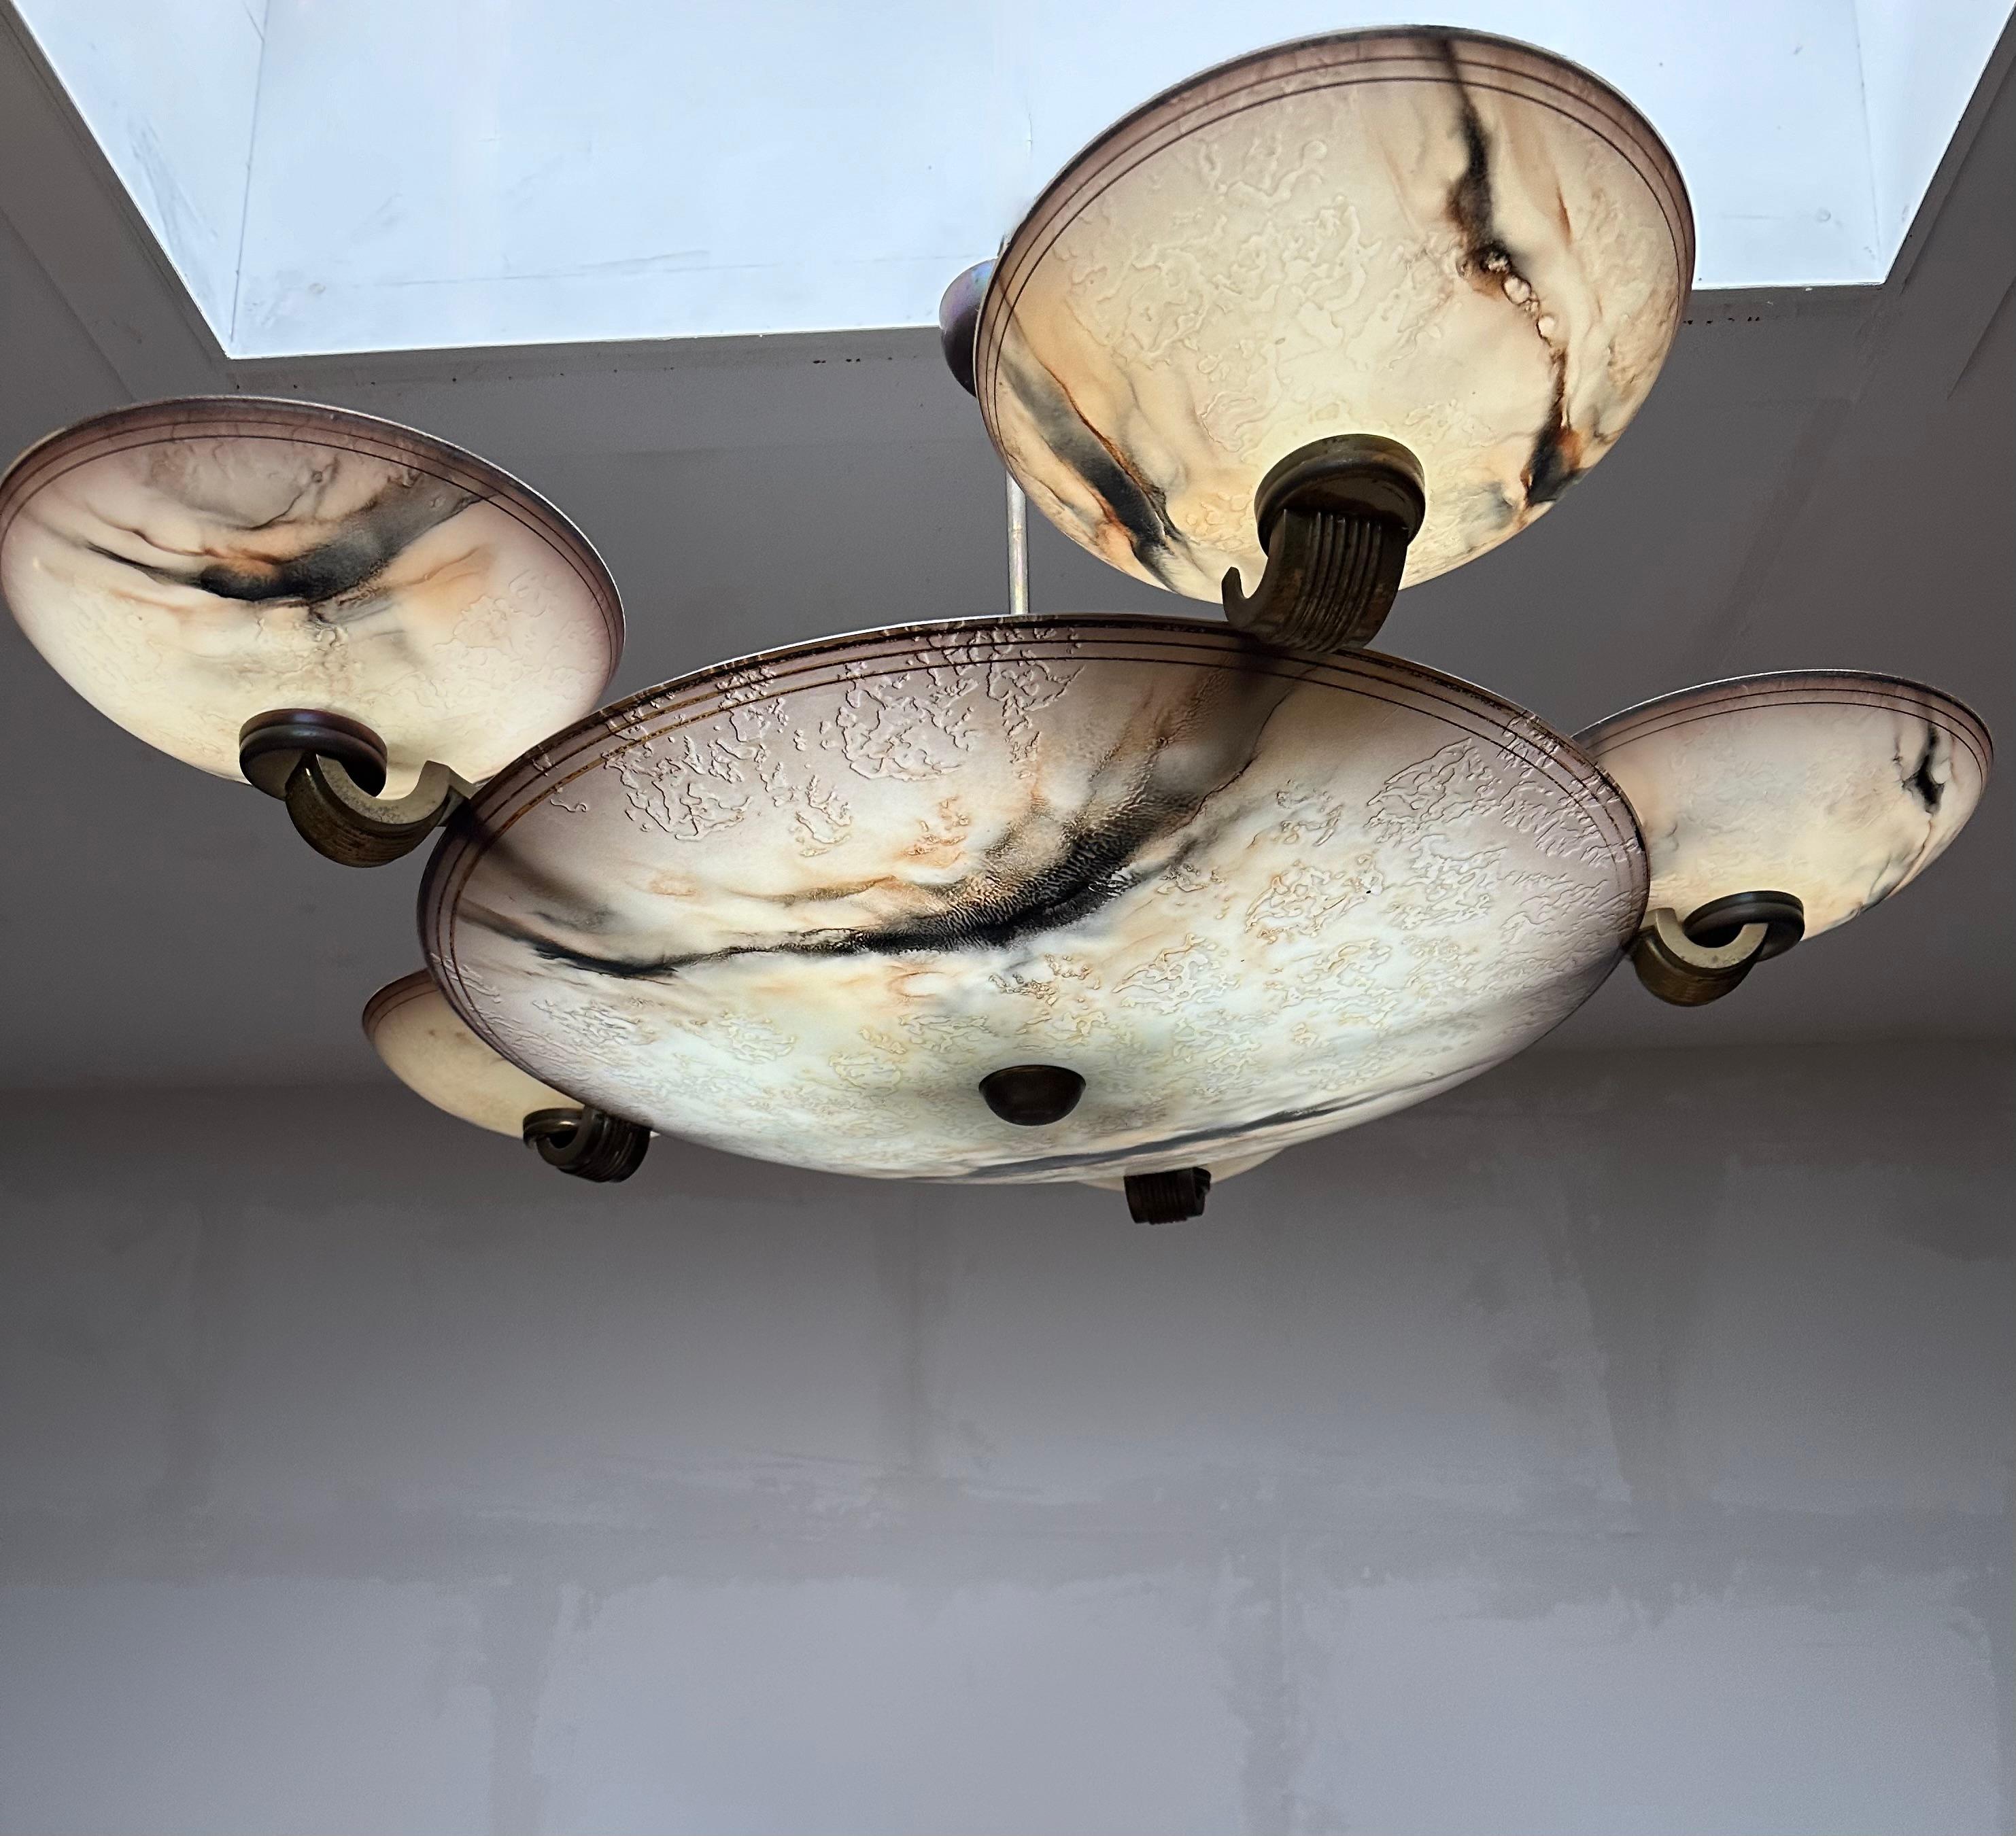 Wonderful and exclusive 1930s lighting ART for the perfect atmosphere by Meissen

If you are looking for a remarkable chandelier to grace your living space then this almost antique Art Deco fixture from circa 1930 could very well be perfect. The